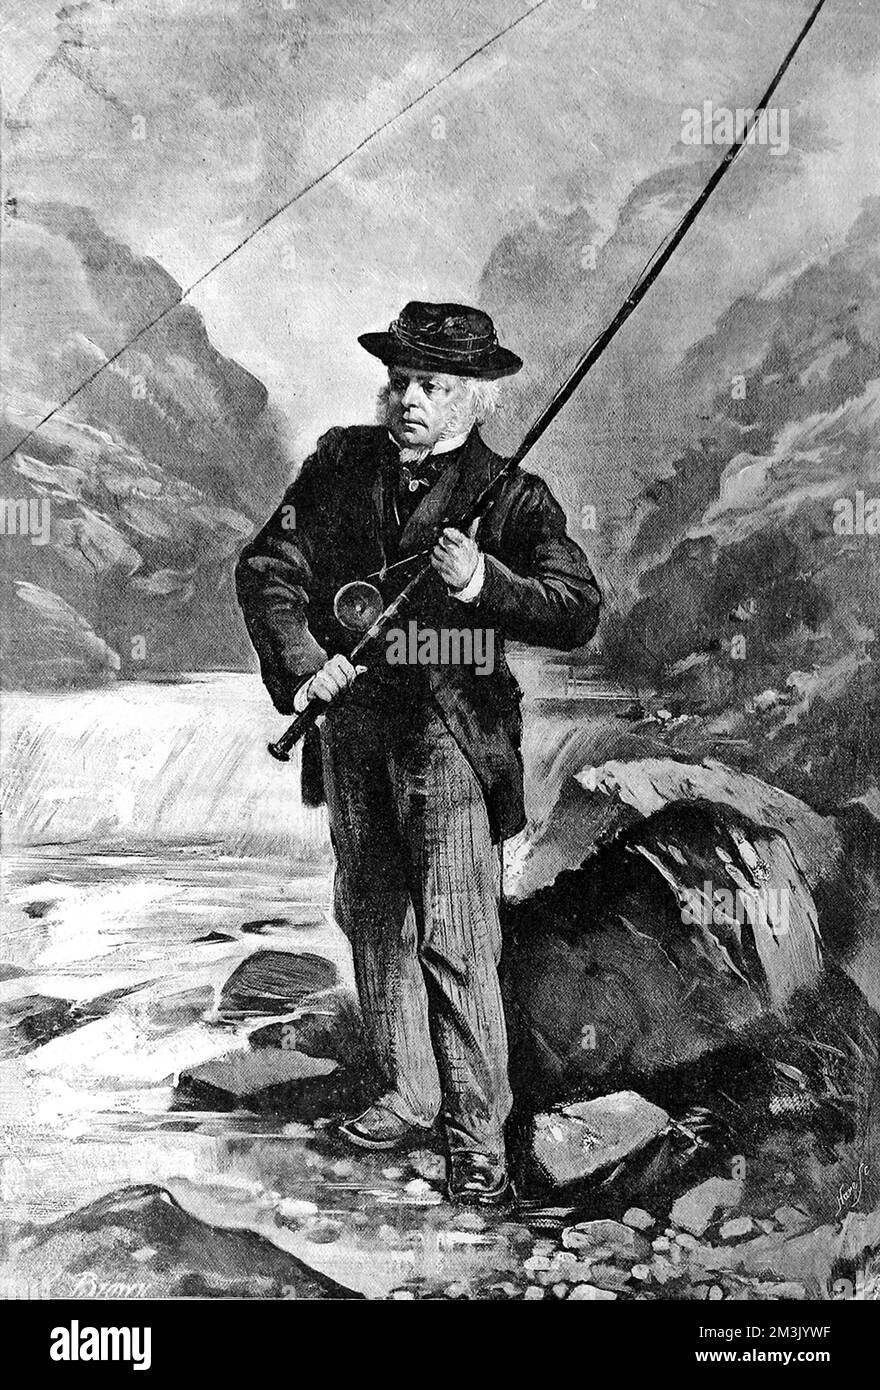 Portrait of John Bright, the English orator and radical politician, salmon fishing in 1889. As well as serving as MP for Durham and Manchester he was also appointed President of the Board of Trade and Chancellor of the Duchy of Lancaster.     Date: 1889 Stock Photo